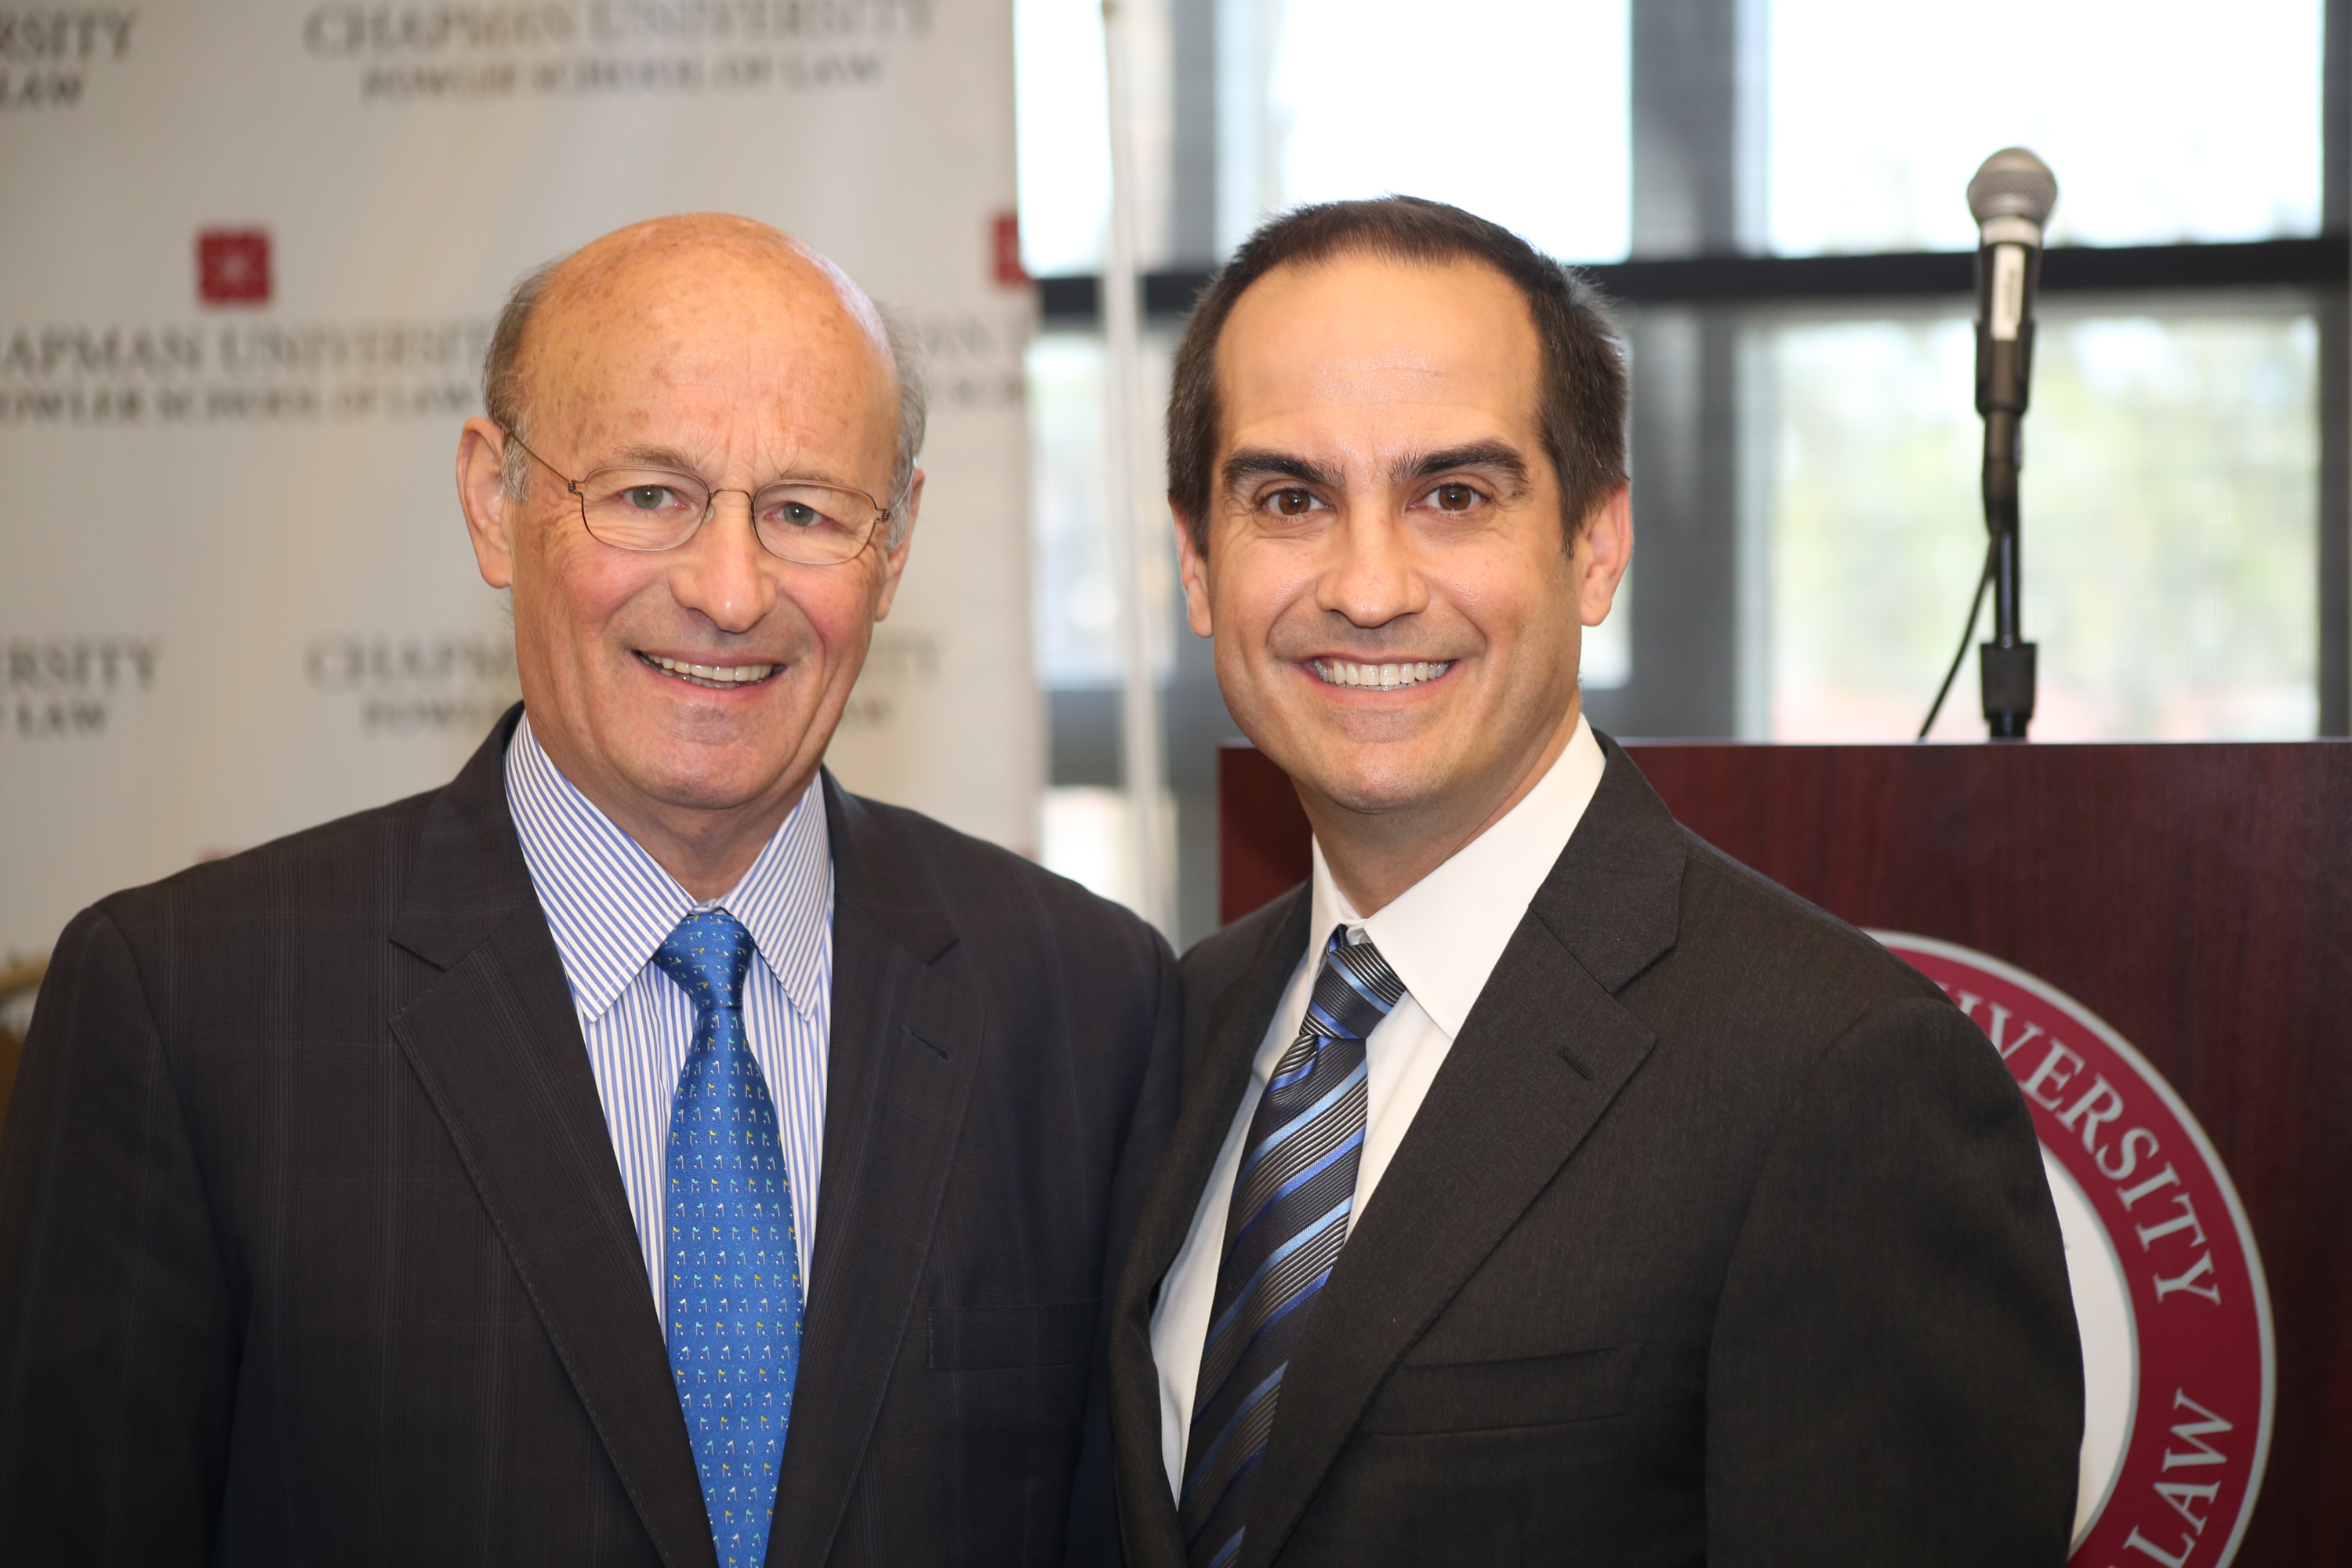 Dodgers President and CEO Stan Kasten, Fowler School of Law Dean Matt Parlow, 2017 Entertainment and Sports Law Symposium